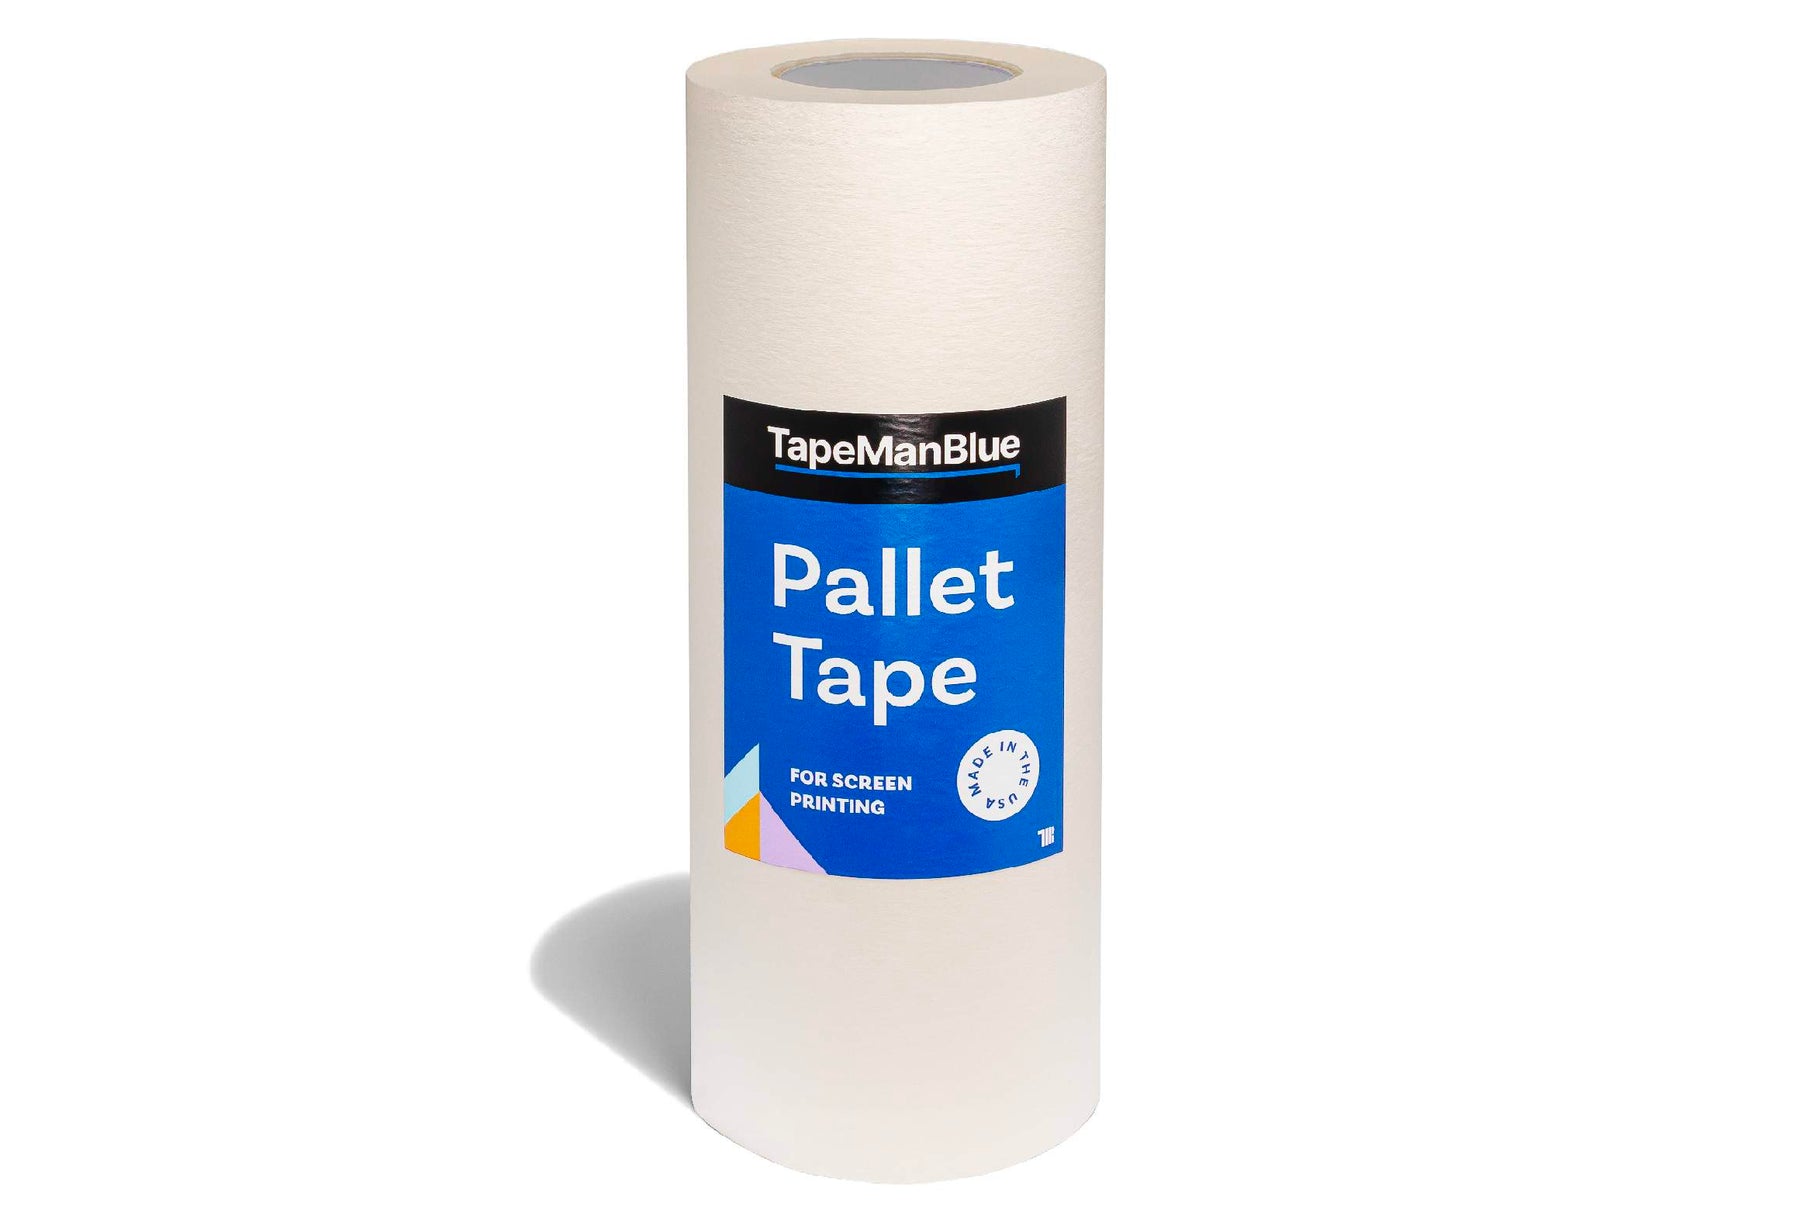 PALLET PROTECT PAPER TAPE - 24 INCHES - Total Ink Solutions